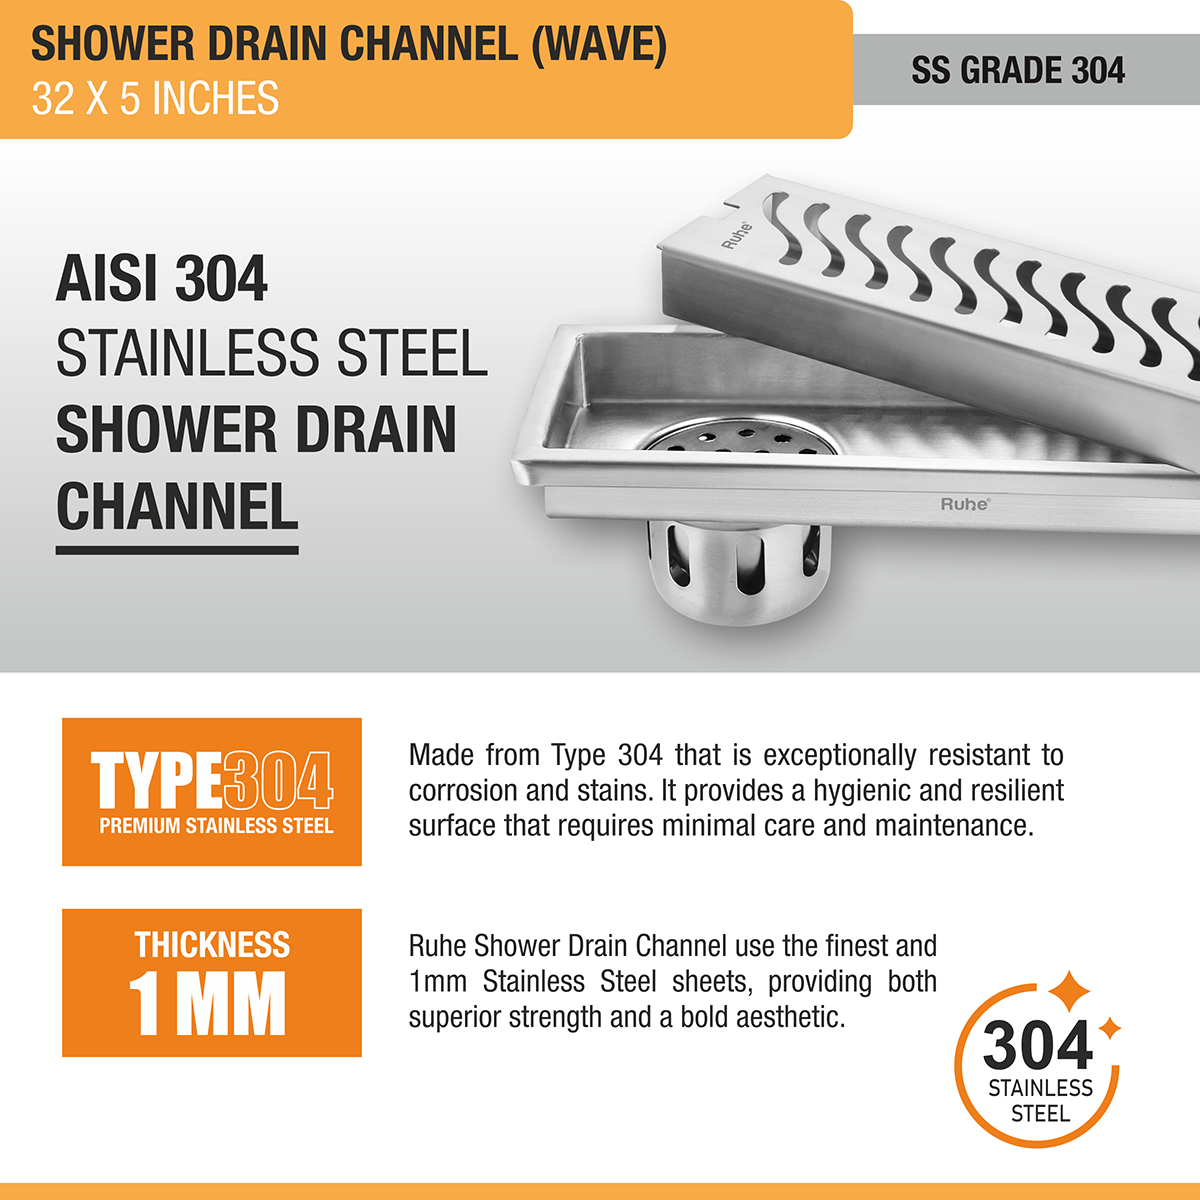 Wave Shower Drain Channel (32 X 5 Inches) with Cockroach Trap (304 Grade) stainless steel